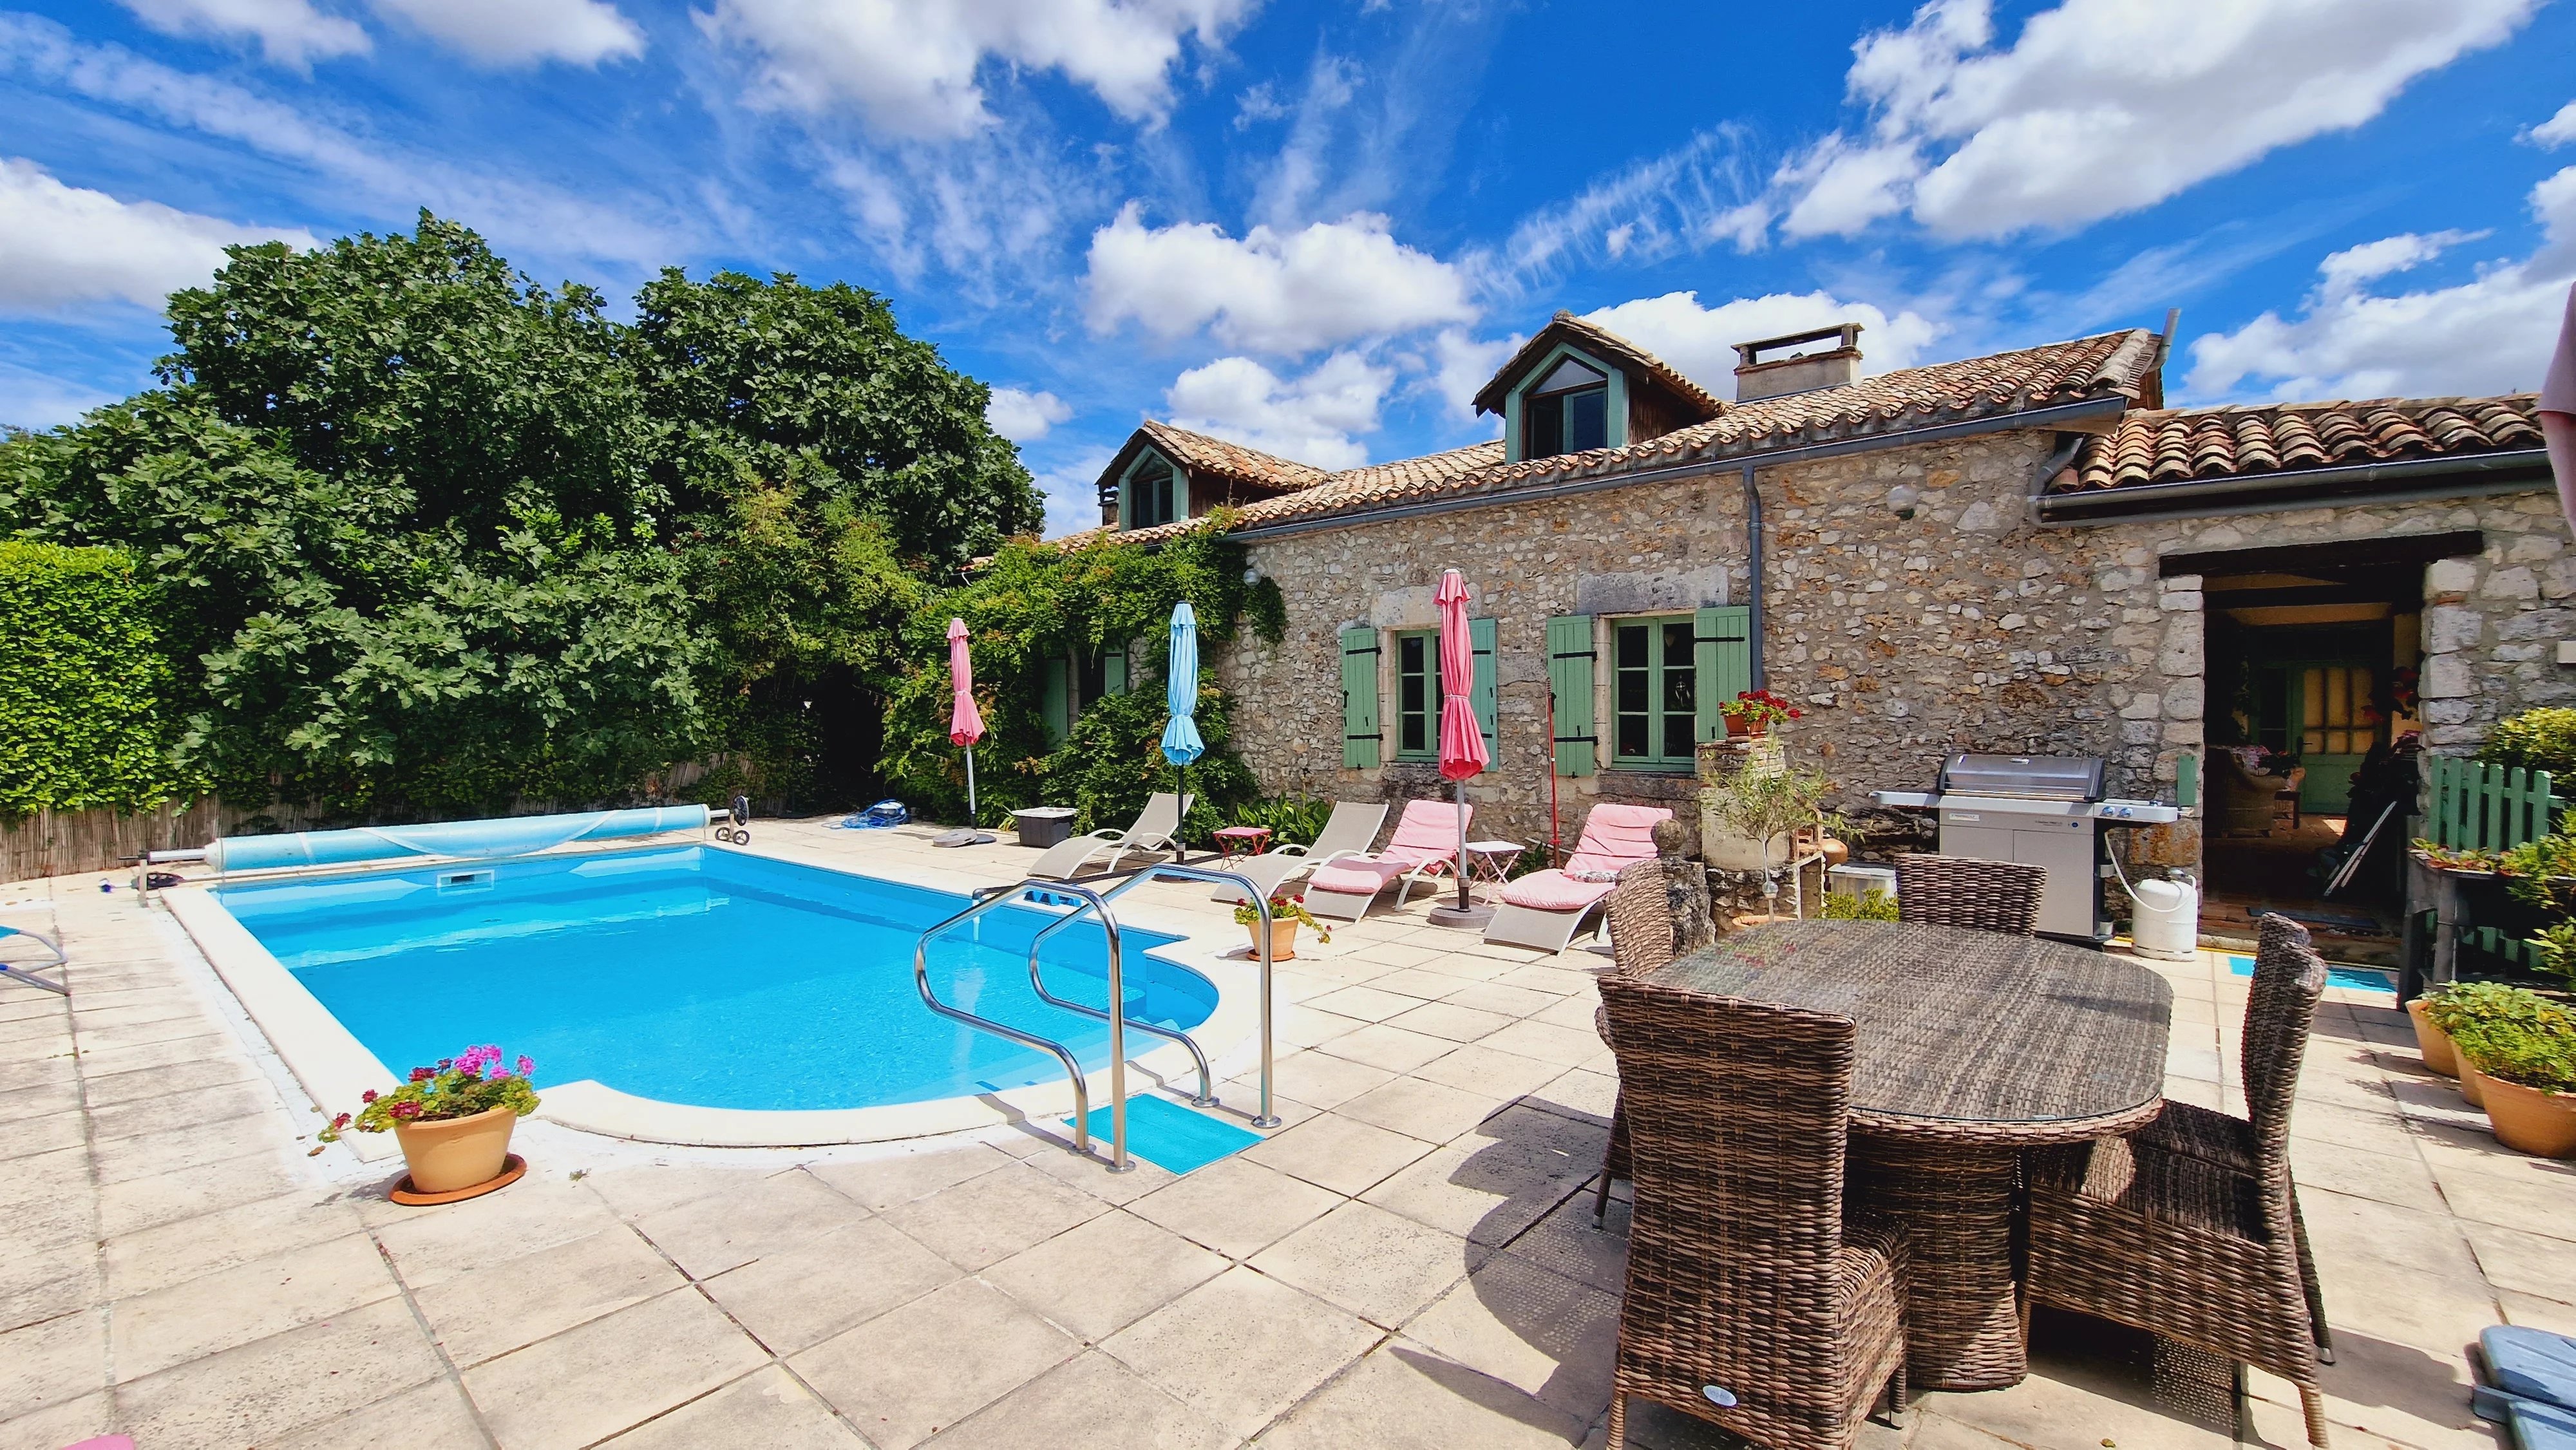 Charming 4 bed house, 2 guest cottages and a pool close to Eymet